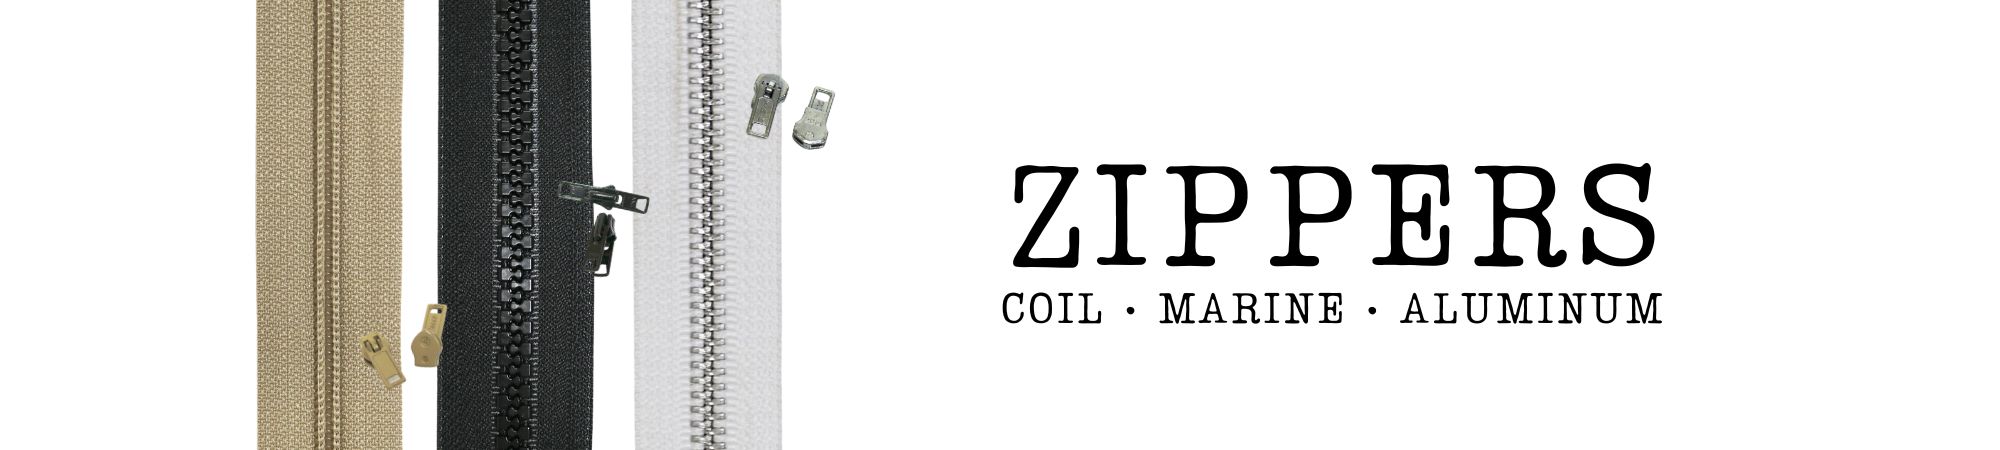 coil marine and aluminum zippers available